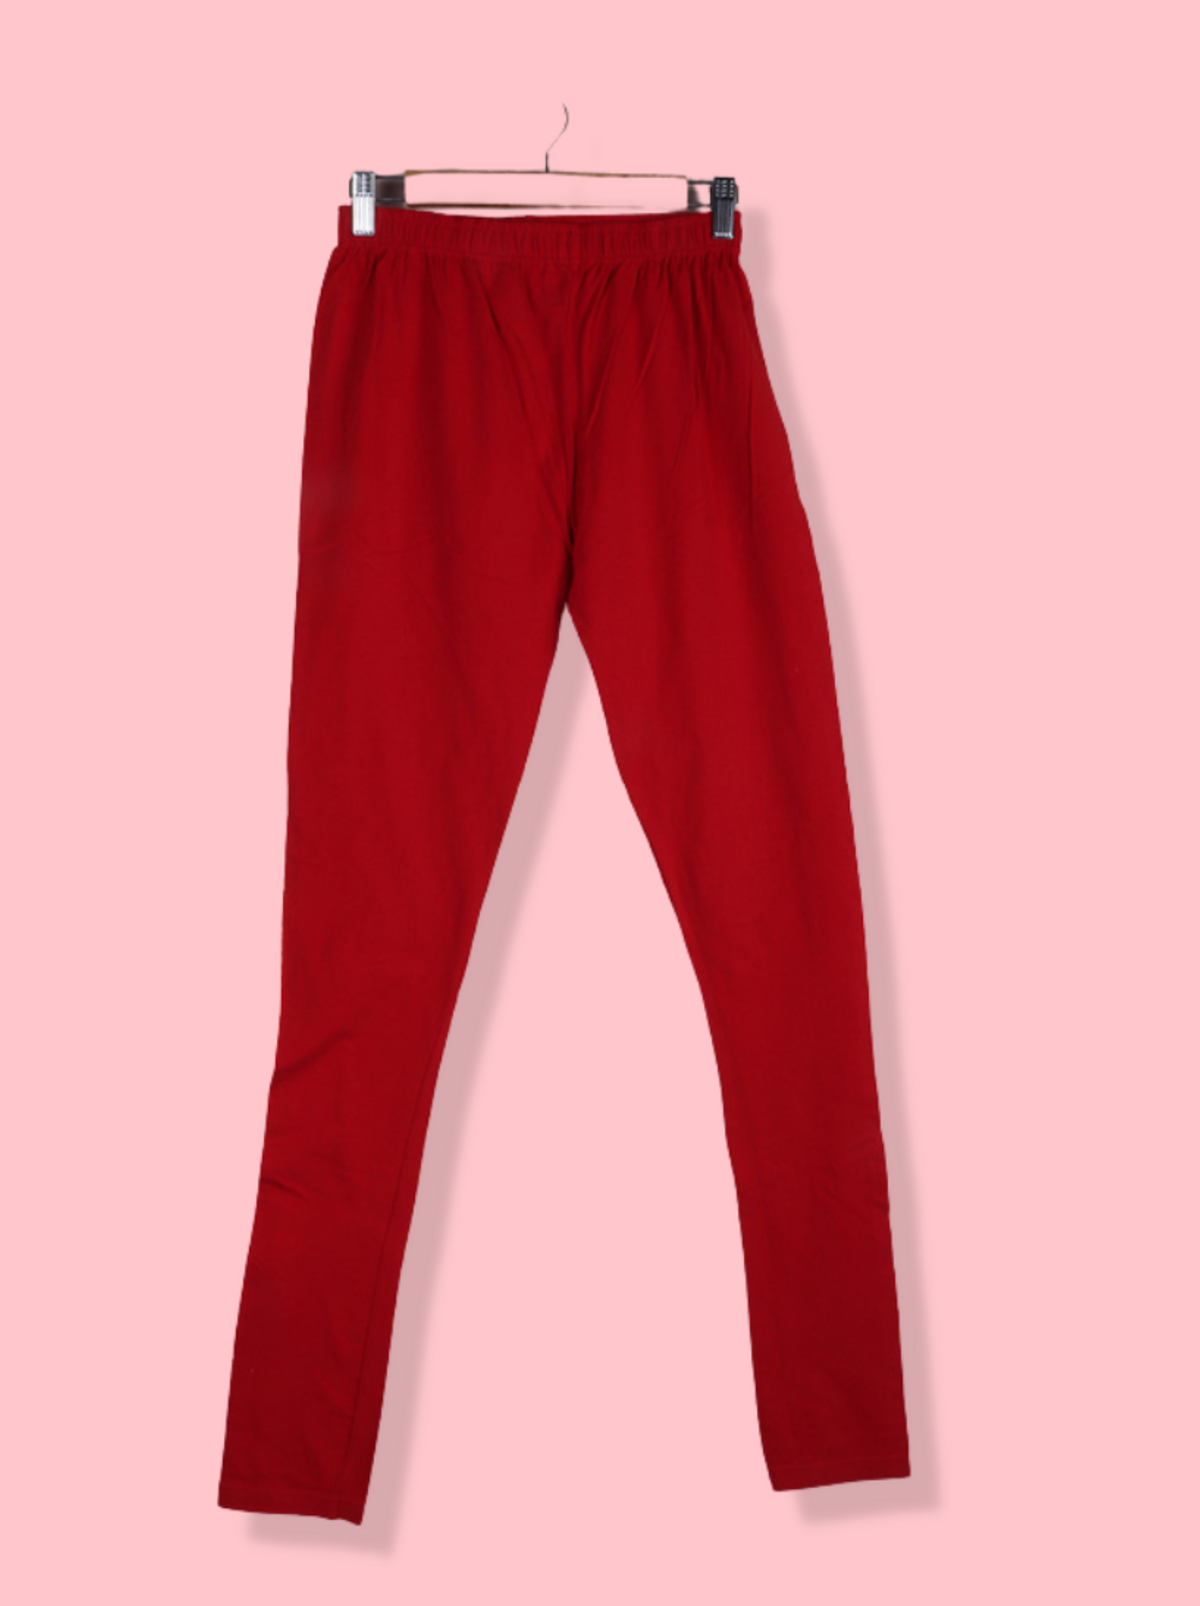 Womens Red Cotton jersey knit Solid Pant